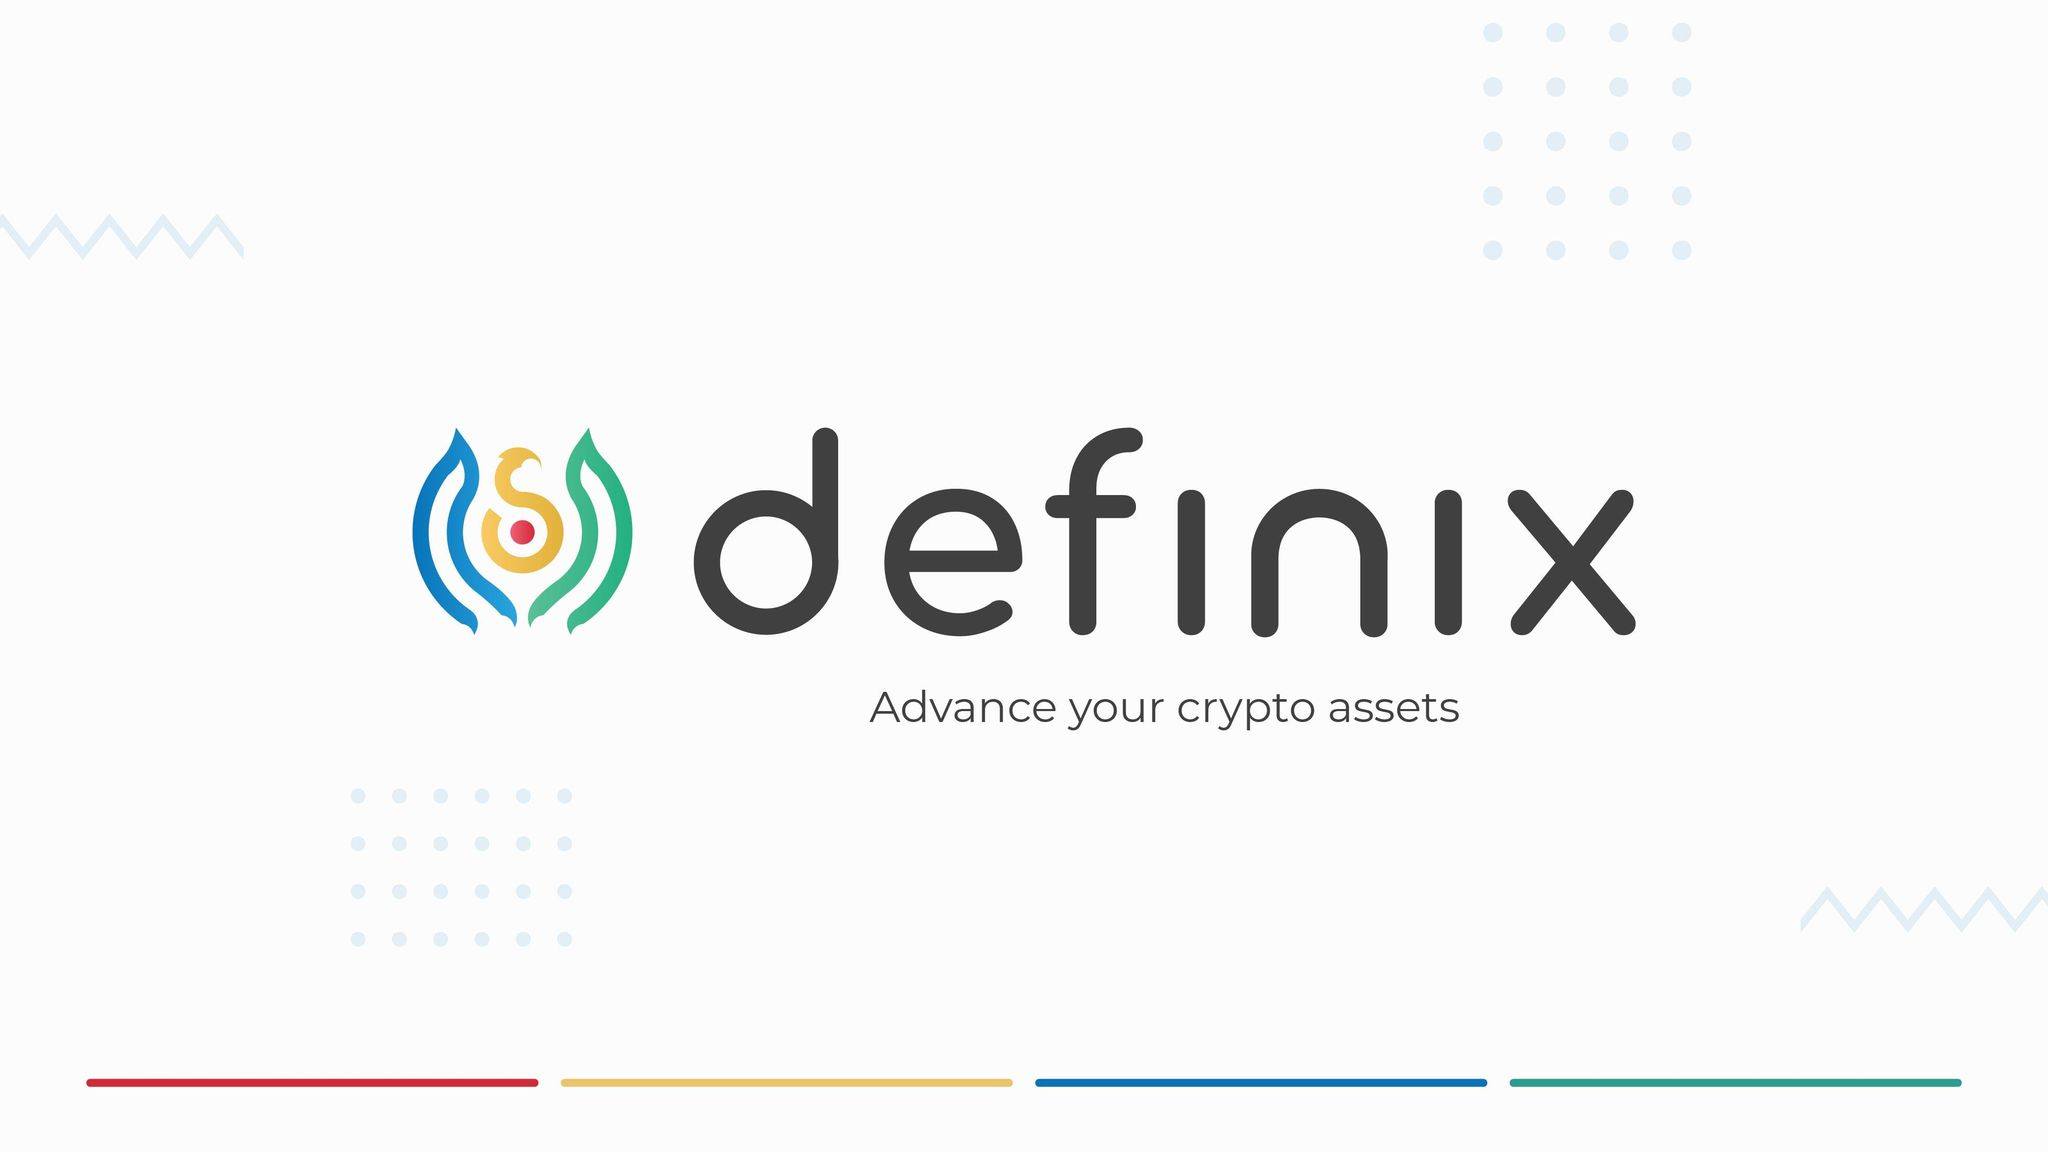 SIX Network launches “Definix” website in preparation for the DeFi platform to be released.